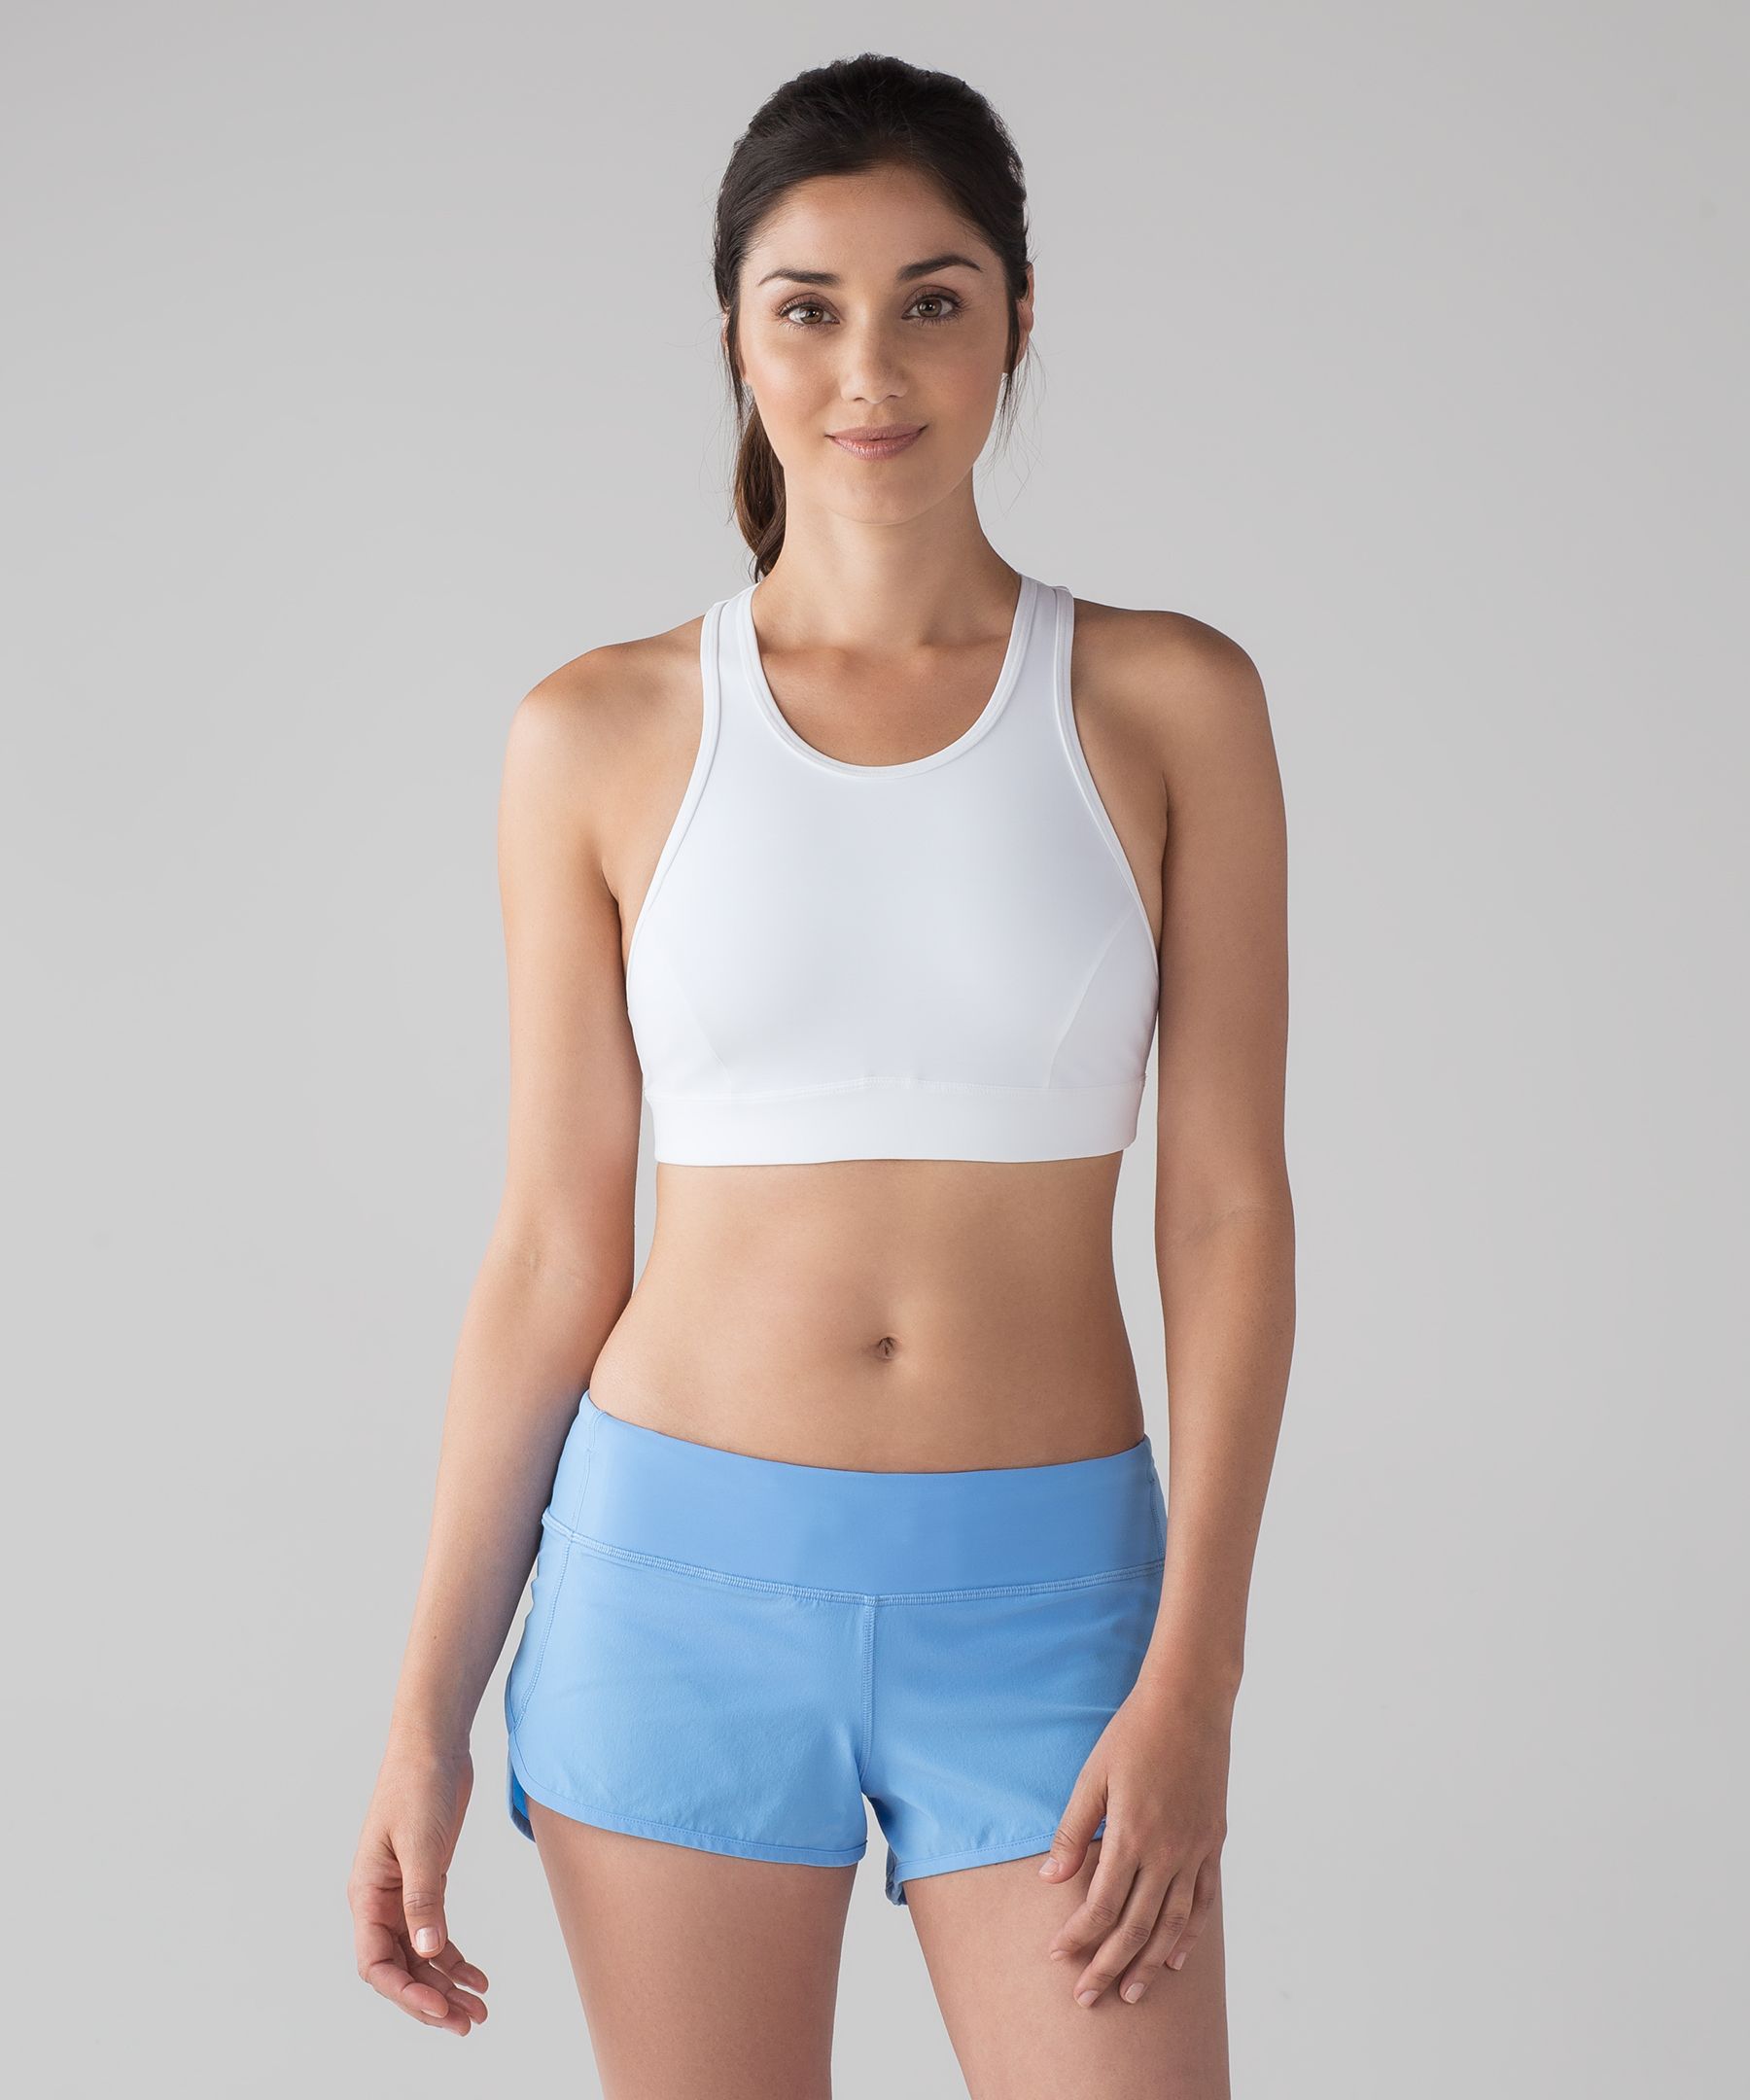 lululemon athletica, Other, Pace Perfect Bra